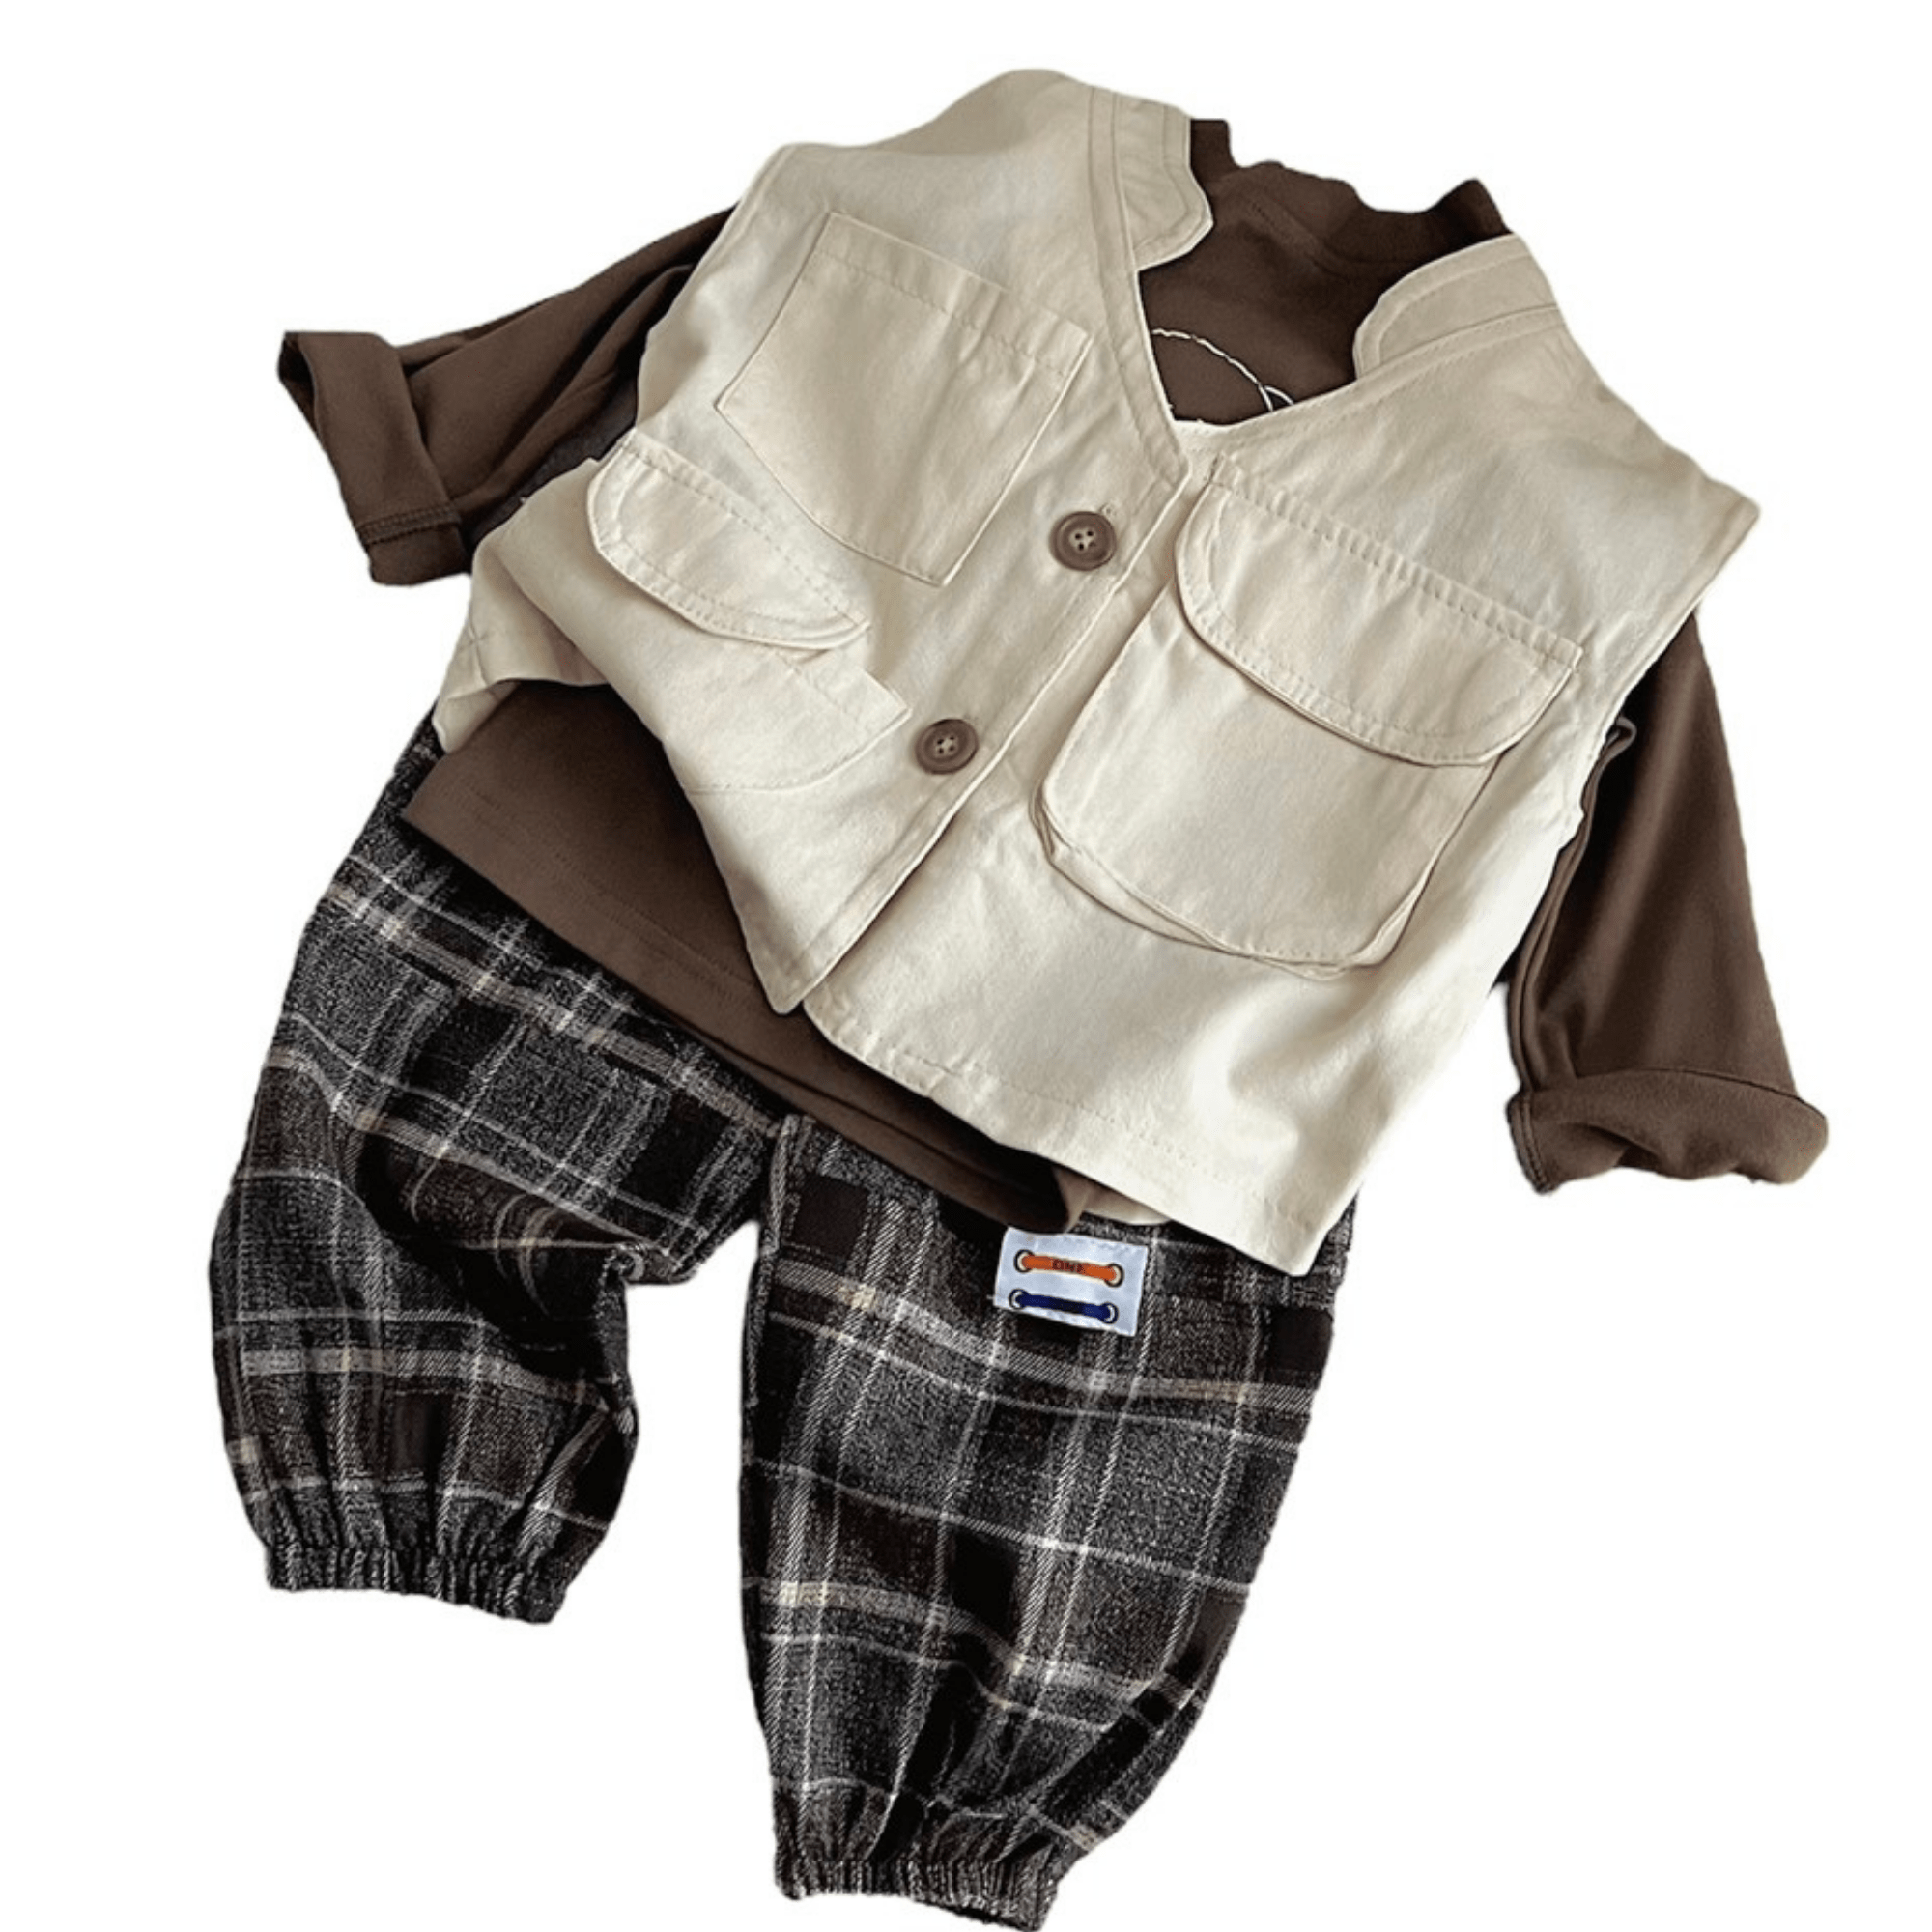 Winter Clothes For Kids Factory Price Wool Baby Boys Set Casual Each One In Opp Bag Vietnam Manufacturer 4